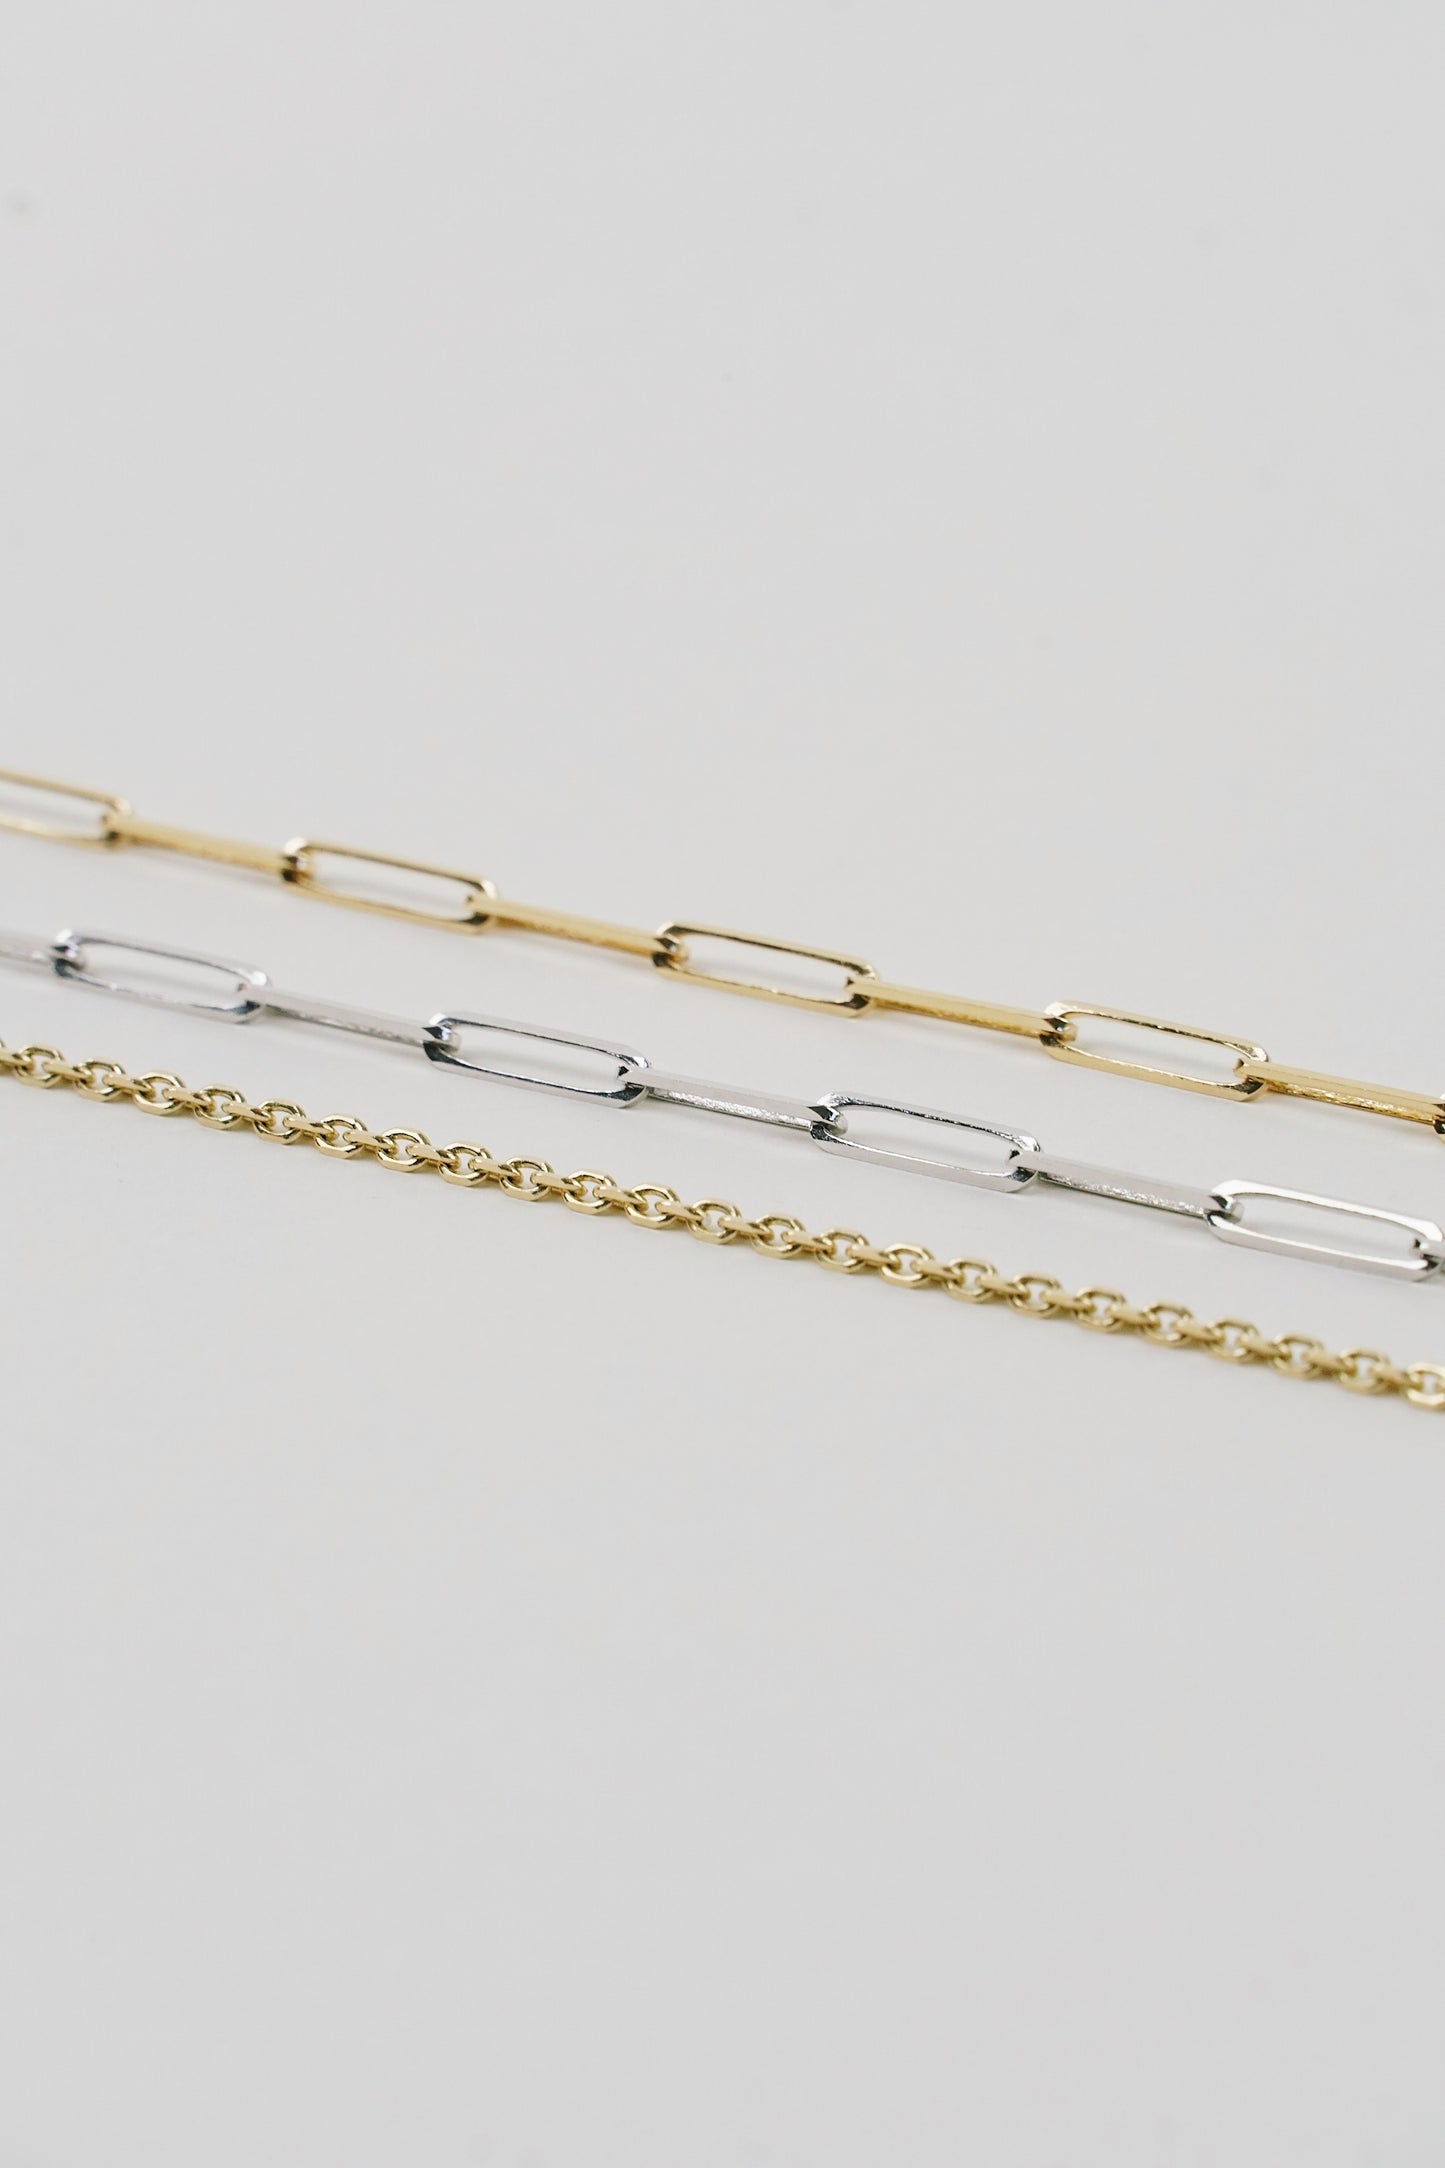 22 " Thick Cable Necklace - 14k Gold